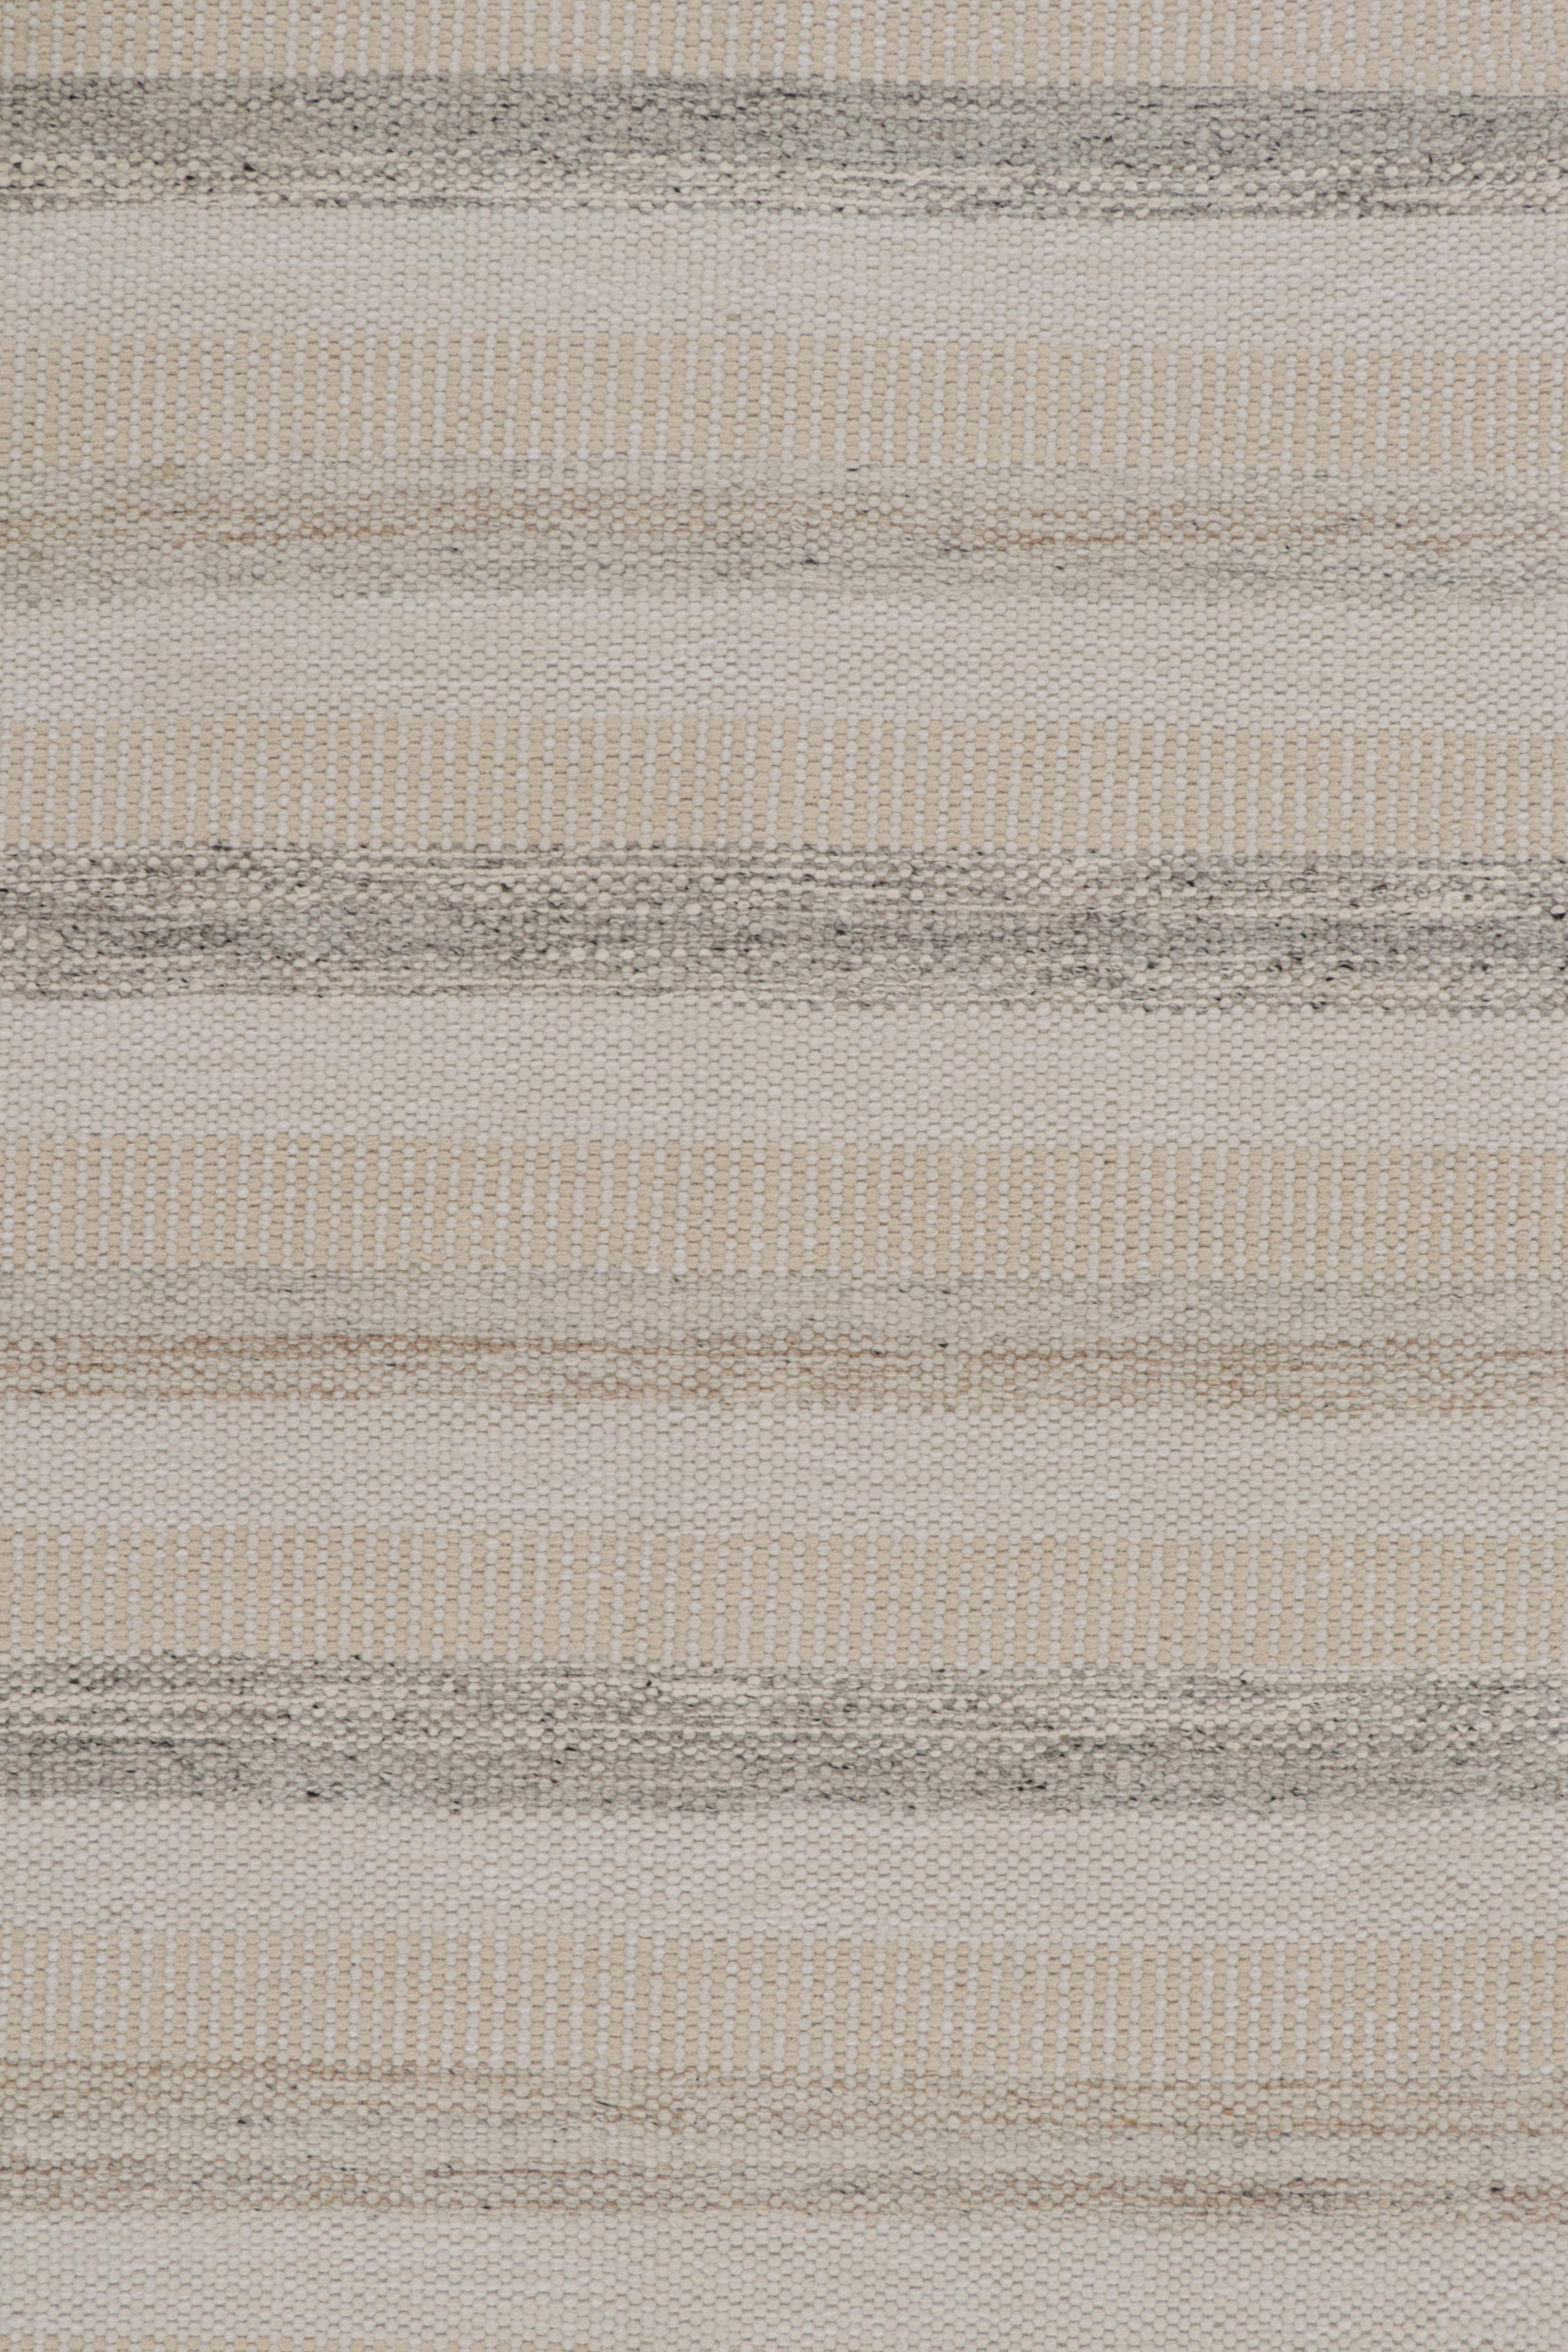 Rug & Kilim’s Scandinavian Style Kilim with White, Beige & Gray Stripes In New Condition For Sale In Long Island City, NY